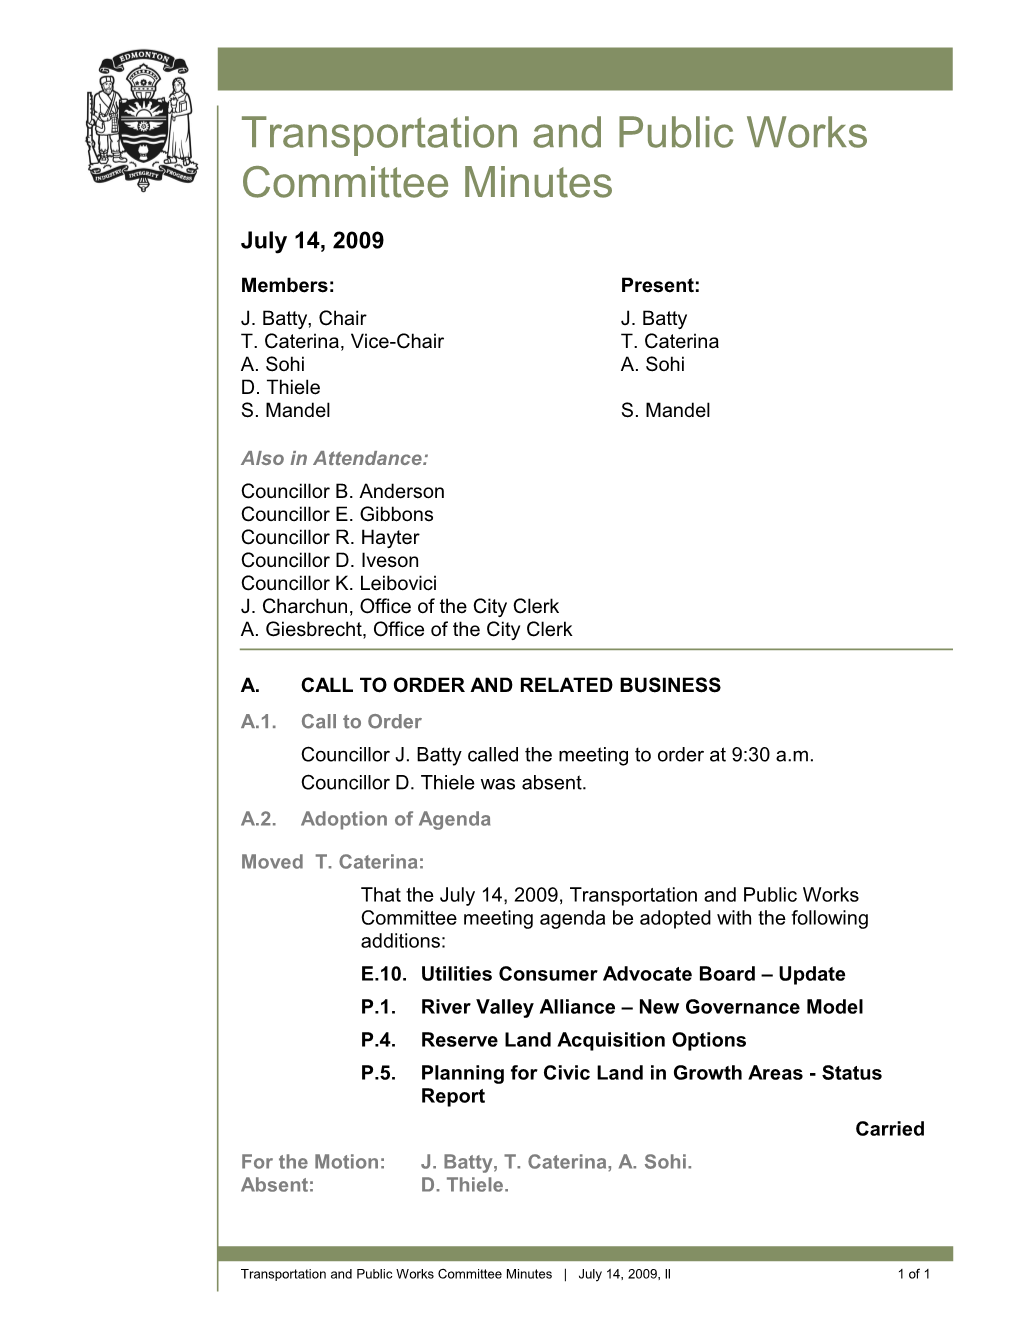 Minutes for Transportation and Public Works Committee July 14, 2009 Meeting